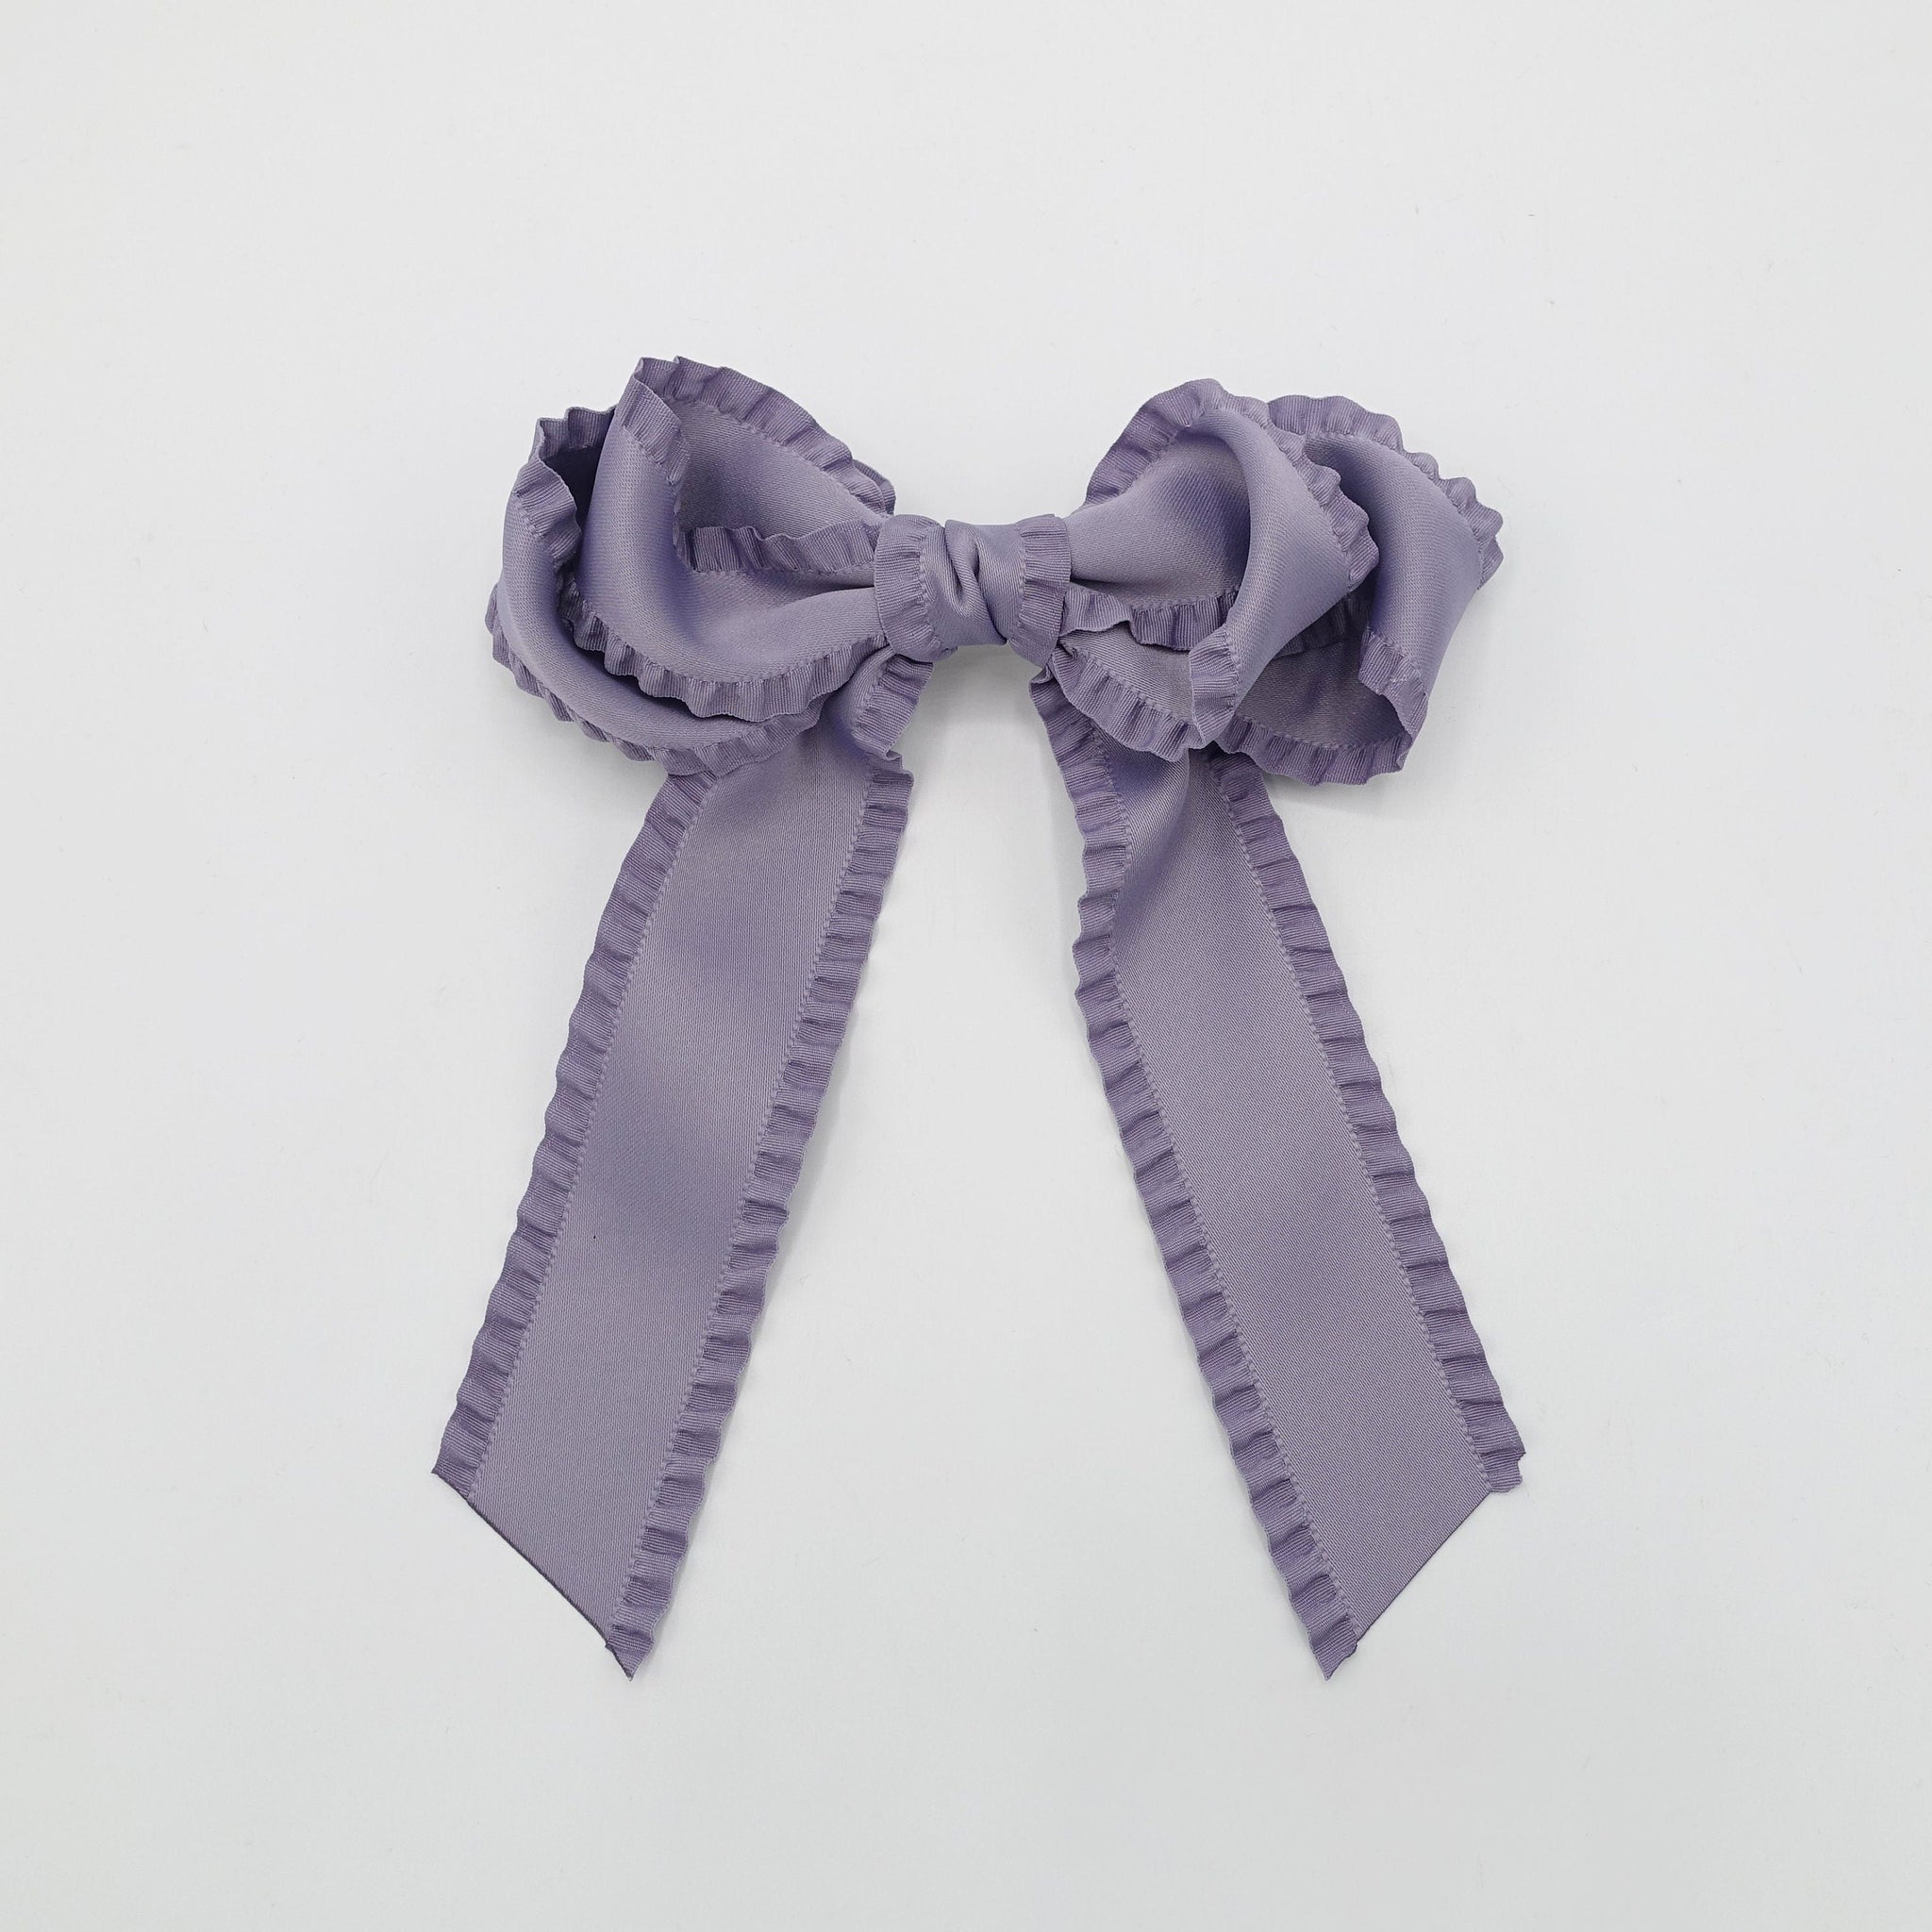 veryshine.com Pale violet long tail frill hair bow edge decorated women hair french barrette hair accessory for women